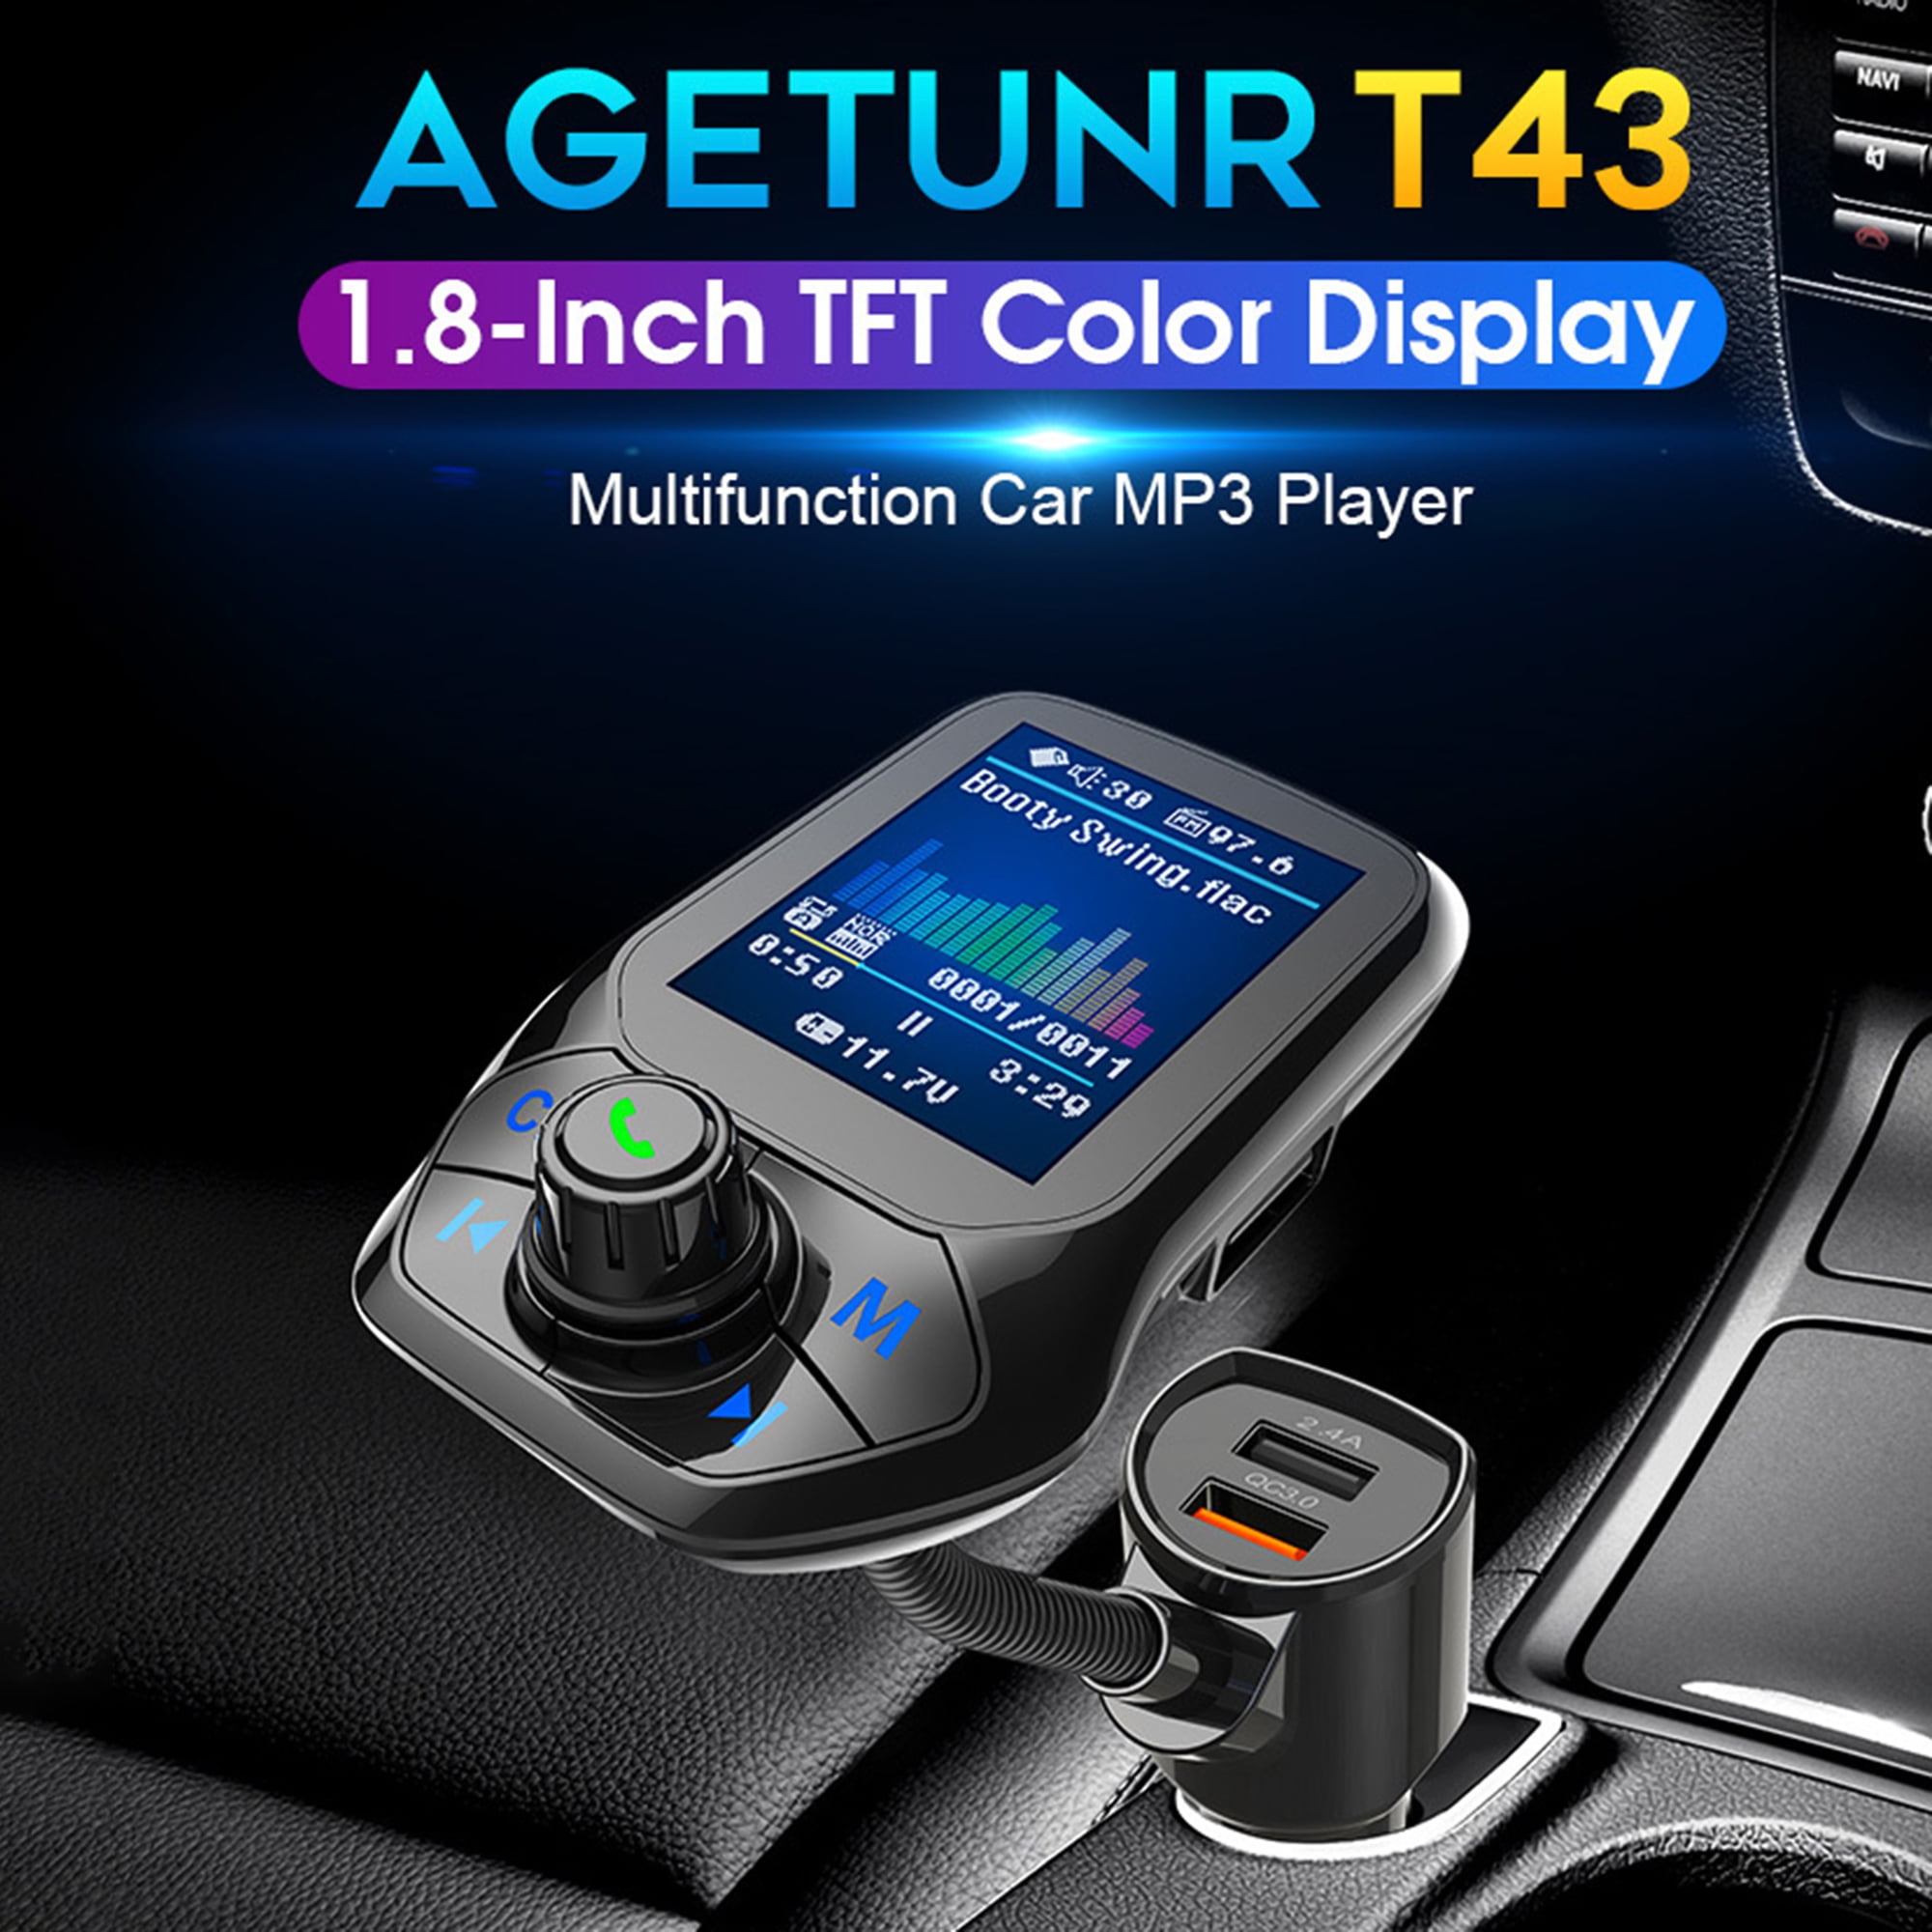 Bluetooth FM Transmitter Radio Adapter HandsFree Calling Charger 3 USB Charging Ports Car Kit Wireless in-Car Receiver Stereo Radio Adapter Music MP3 Player TF Card for Smartphone Samsung Galaxy LG 